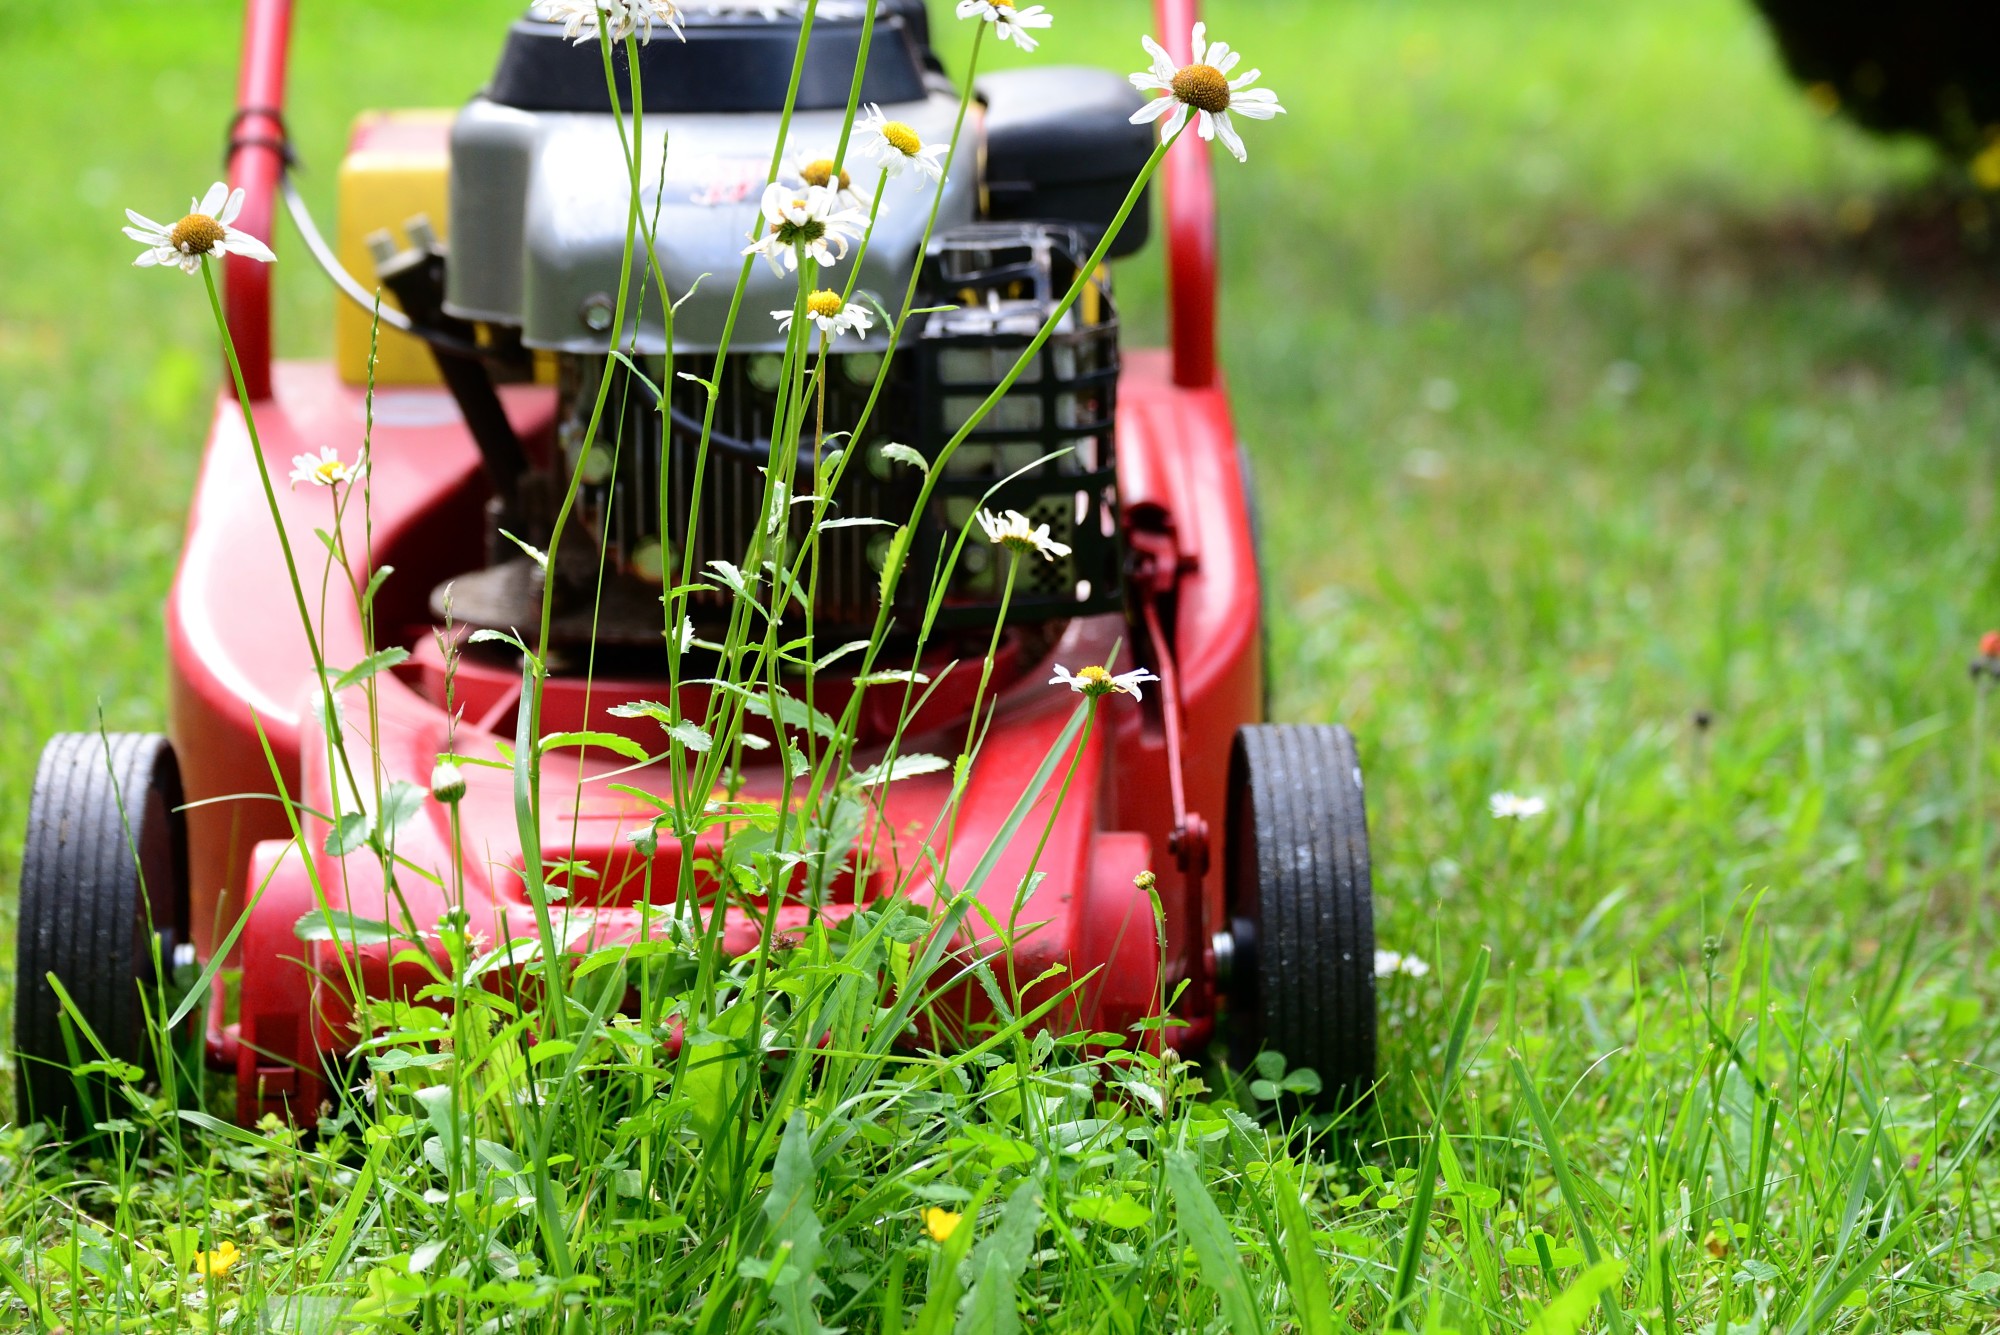 It's difficult to have a beautiful home without a beautiful lawn. Here's what you can do to ensure your lawn stays lush throughout the year.